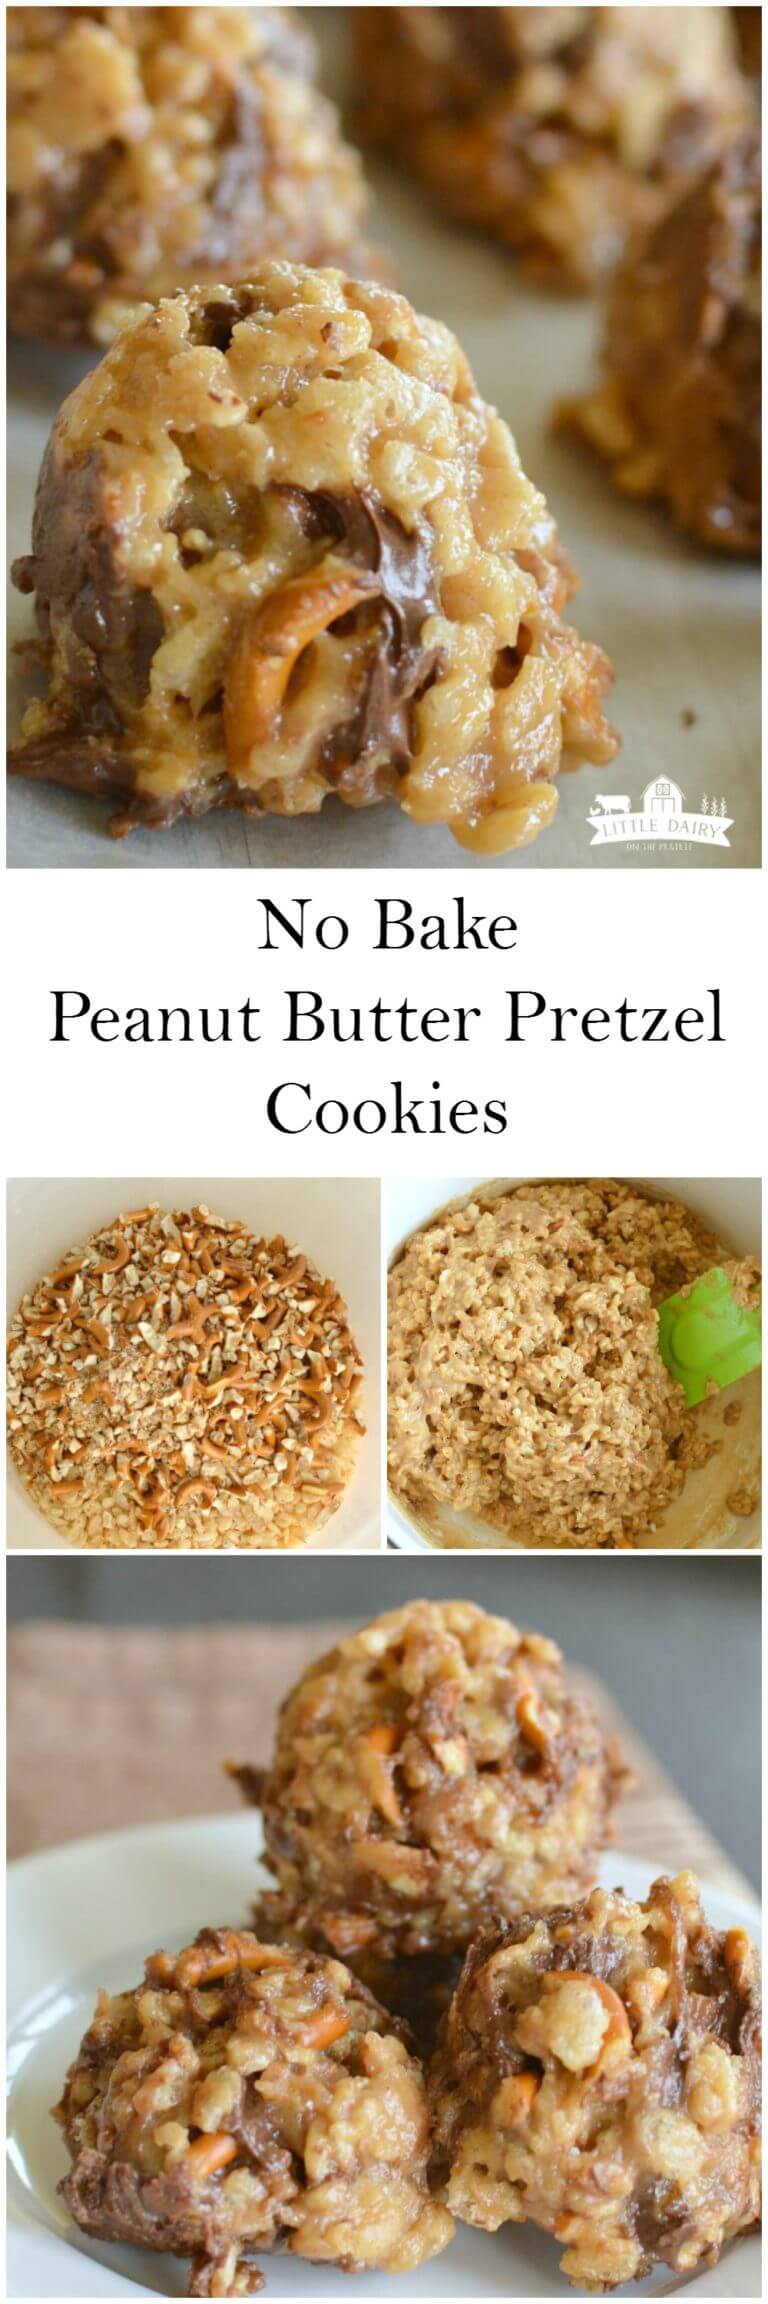 No Bake Peanut Butter Pretzel Cookies – Perfect for the Holidays